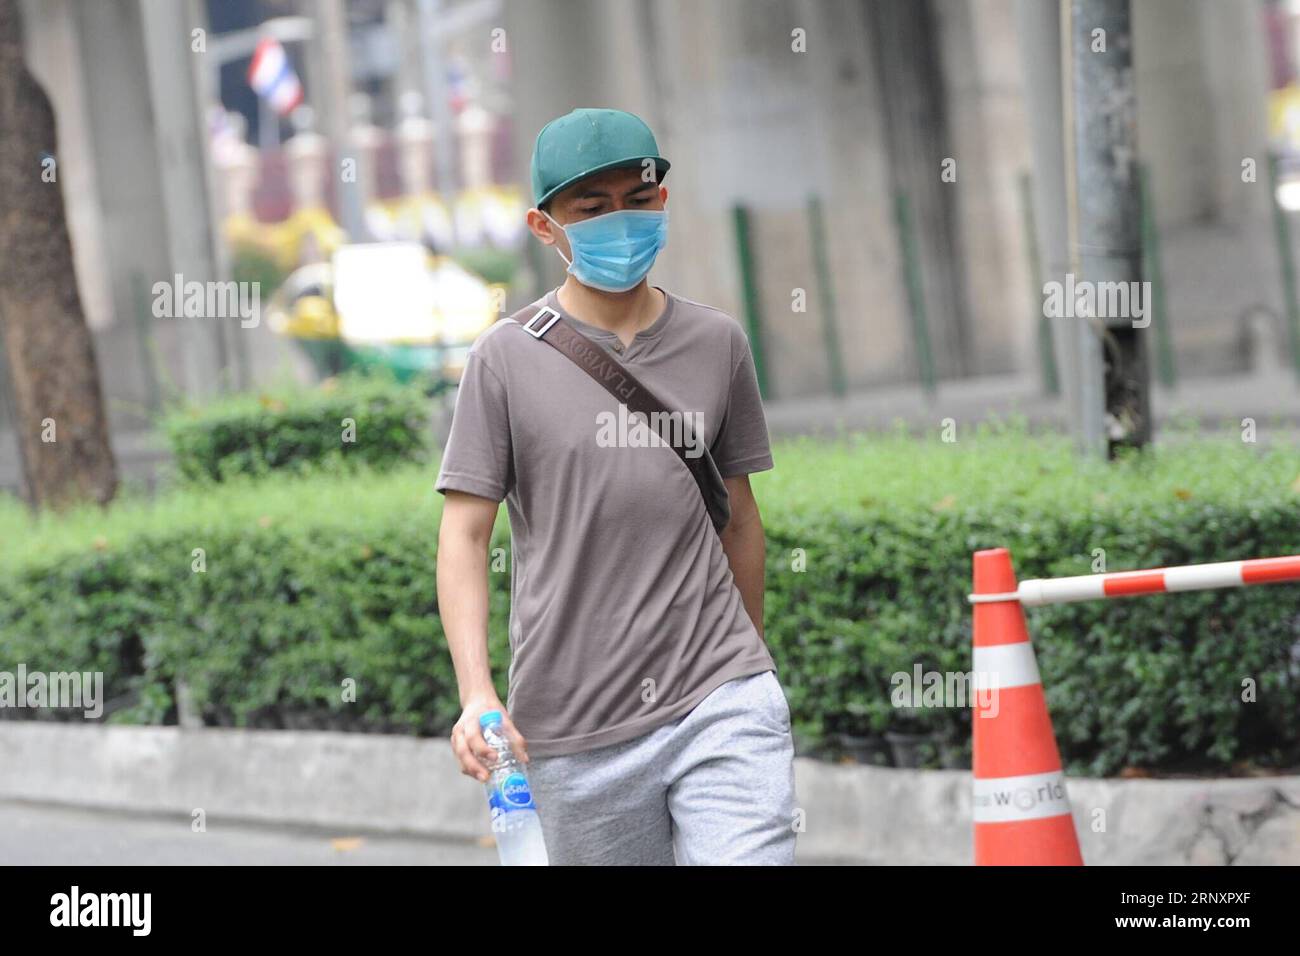 (180209) -- BANGKOK, Feb. 9, 2018 -- A man wears a face mask to protect himself from air pollutions in Bangkok, Thailand, on Feb. 9, 2018. )(zf) THAILAND-BANGKOK-AIR POLLUTION RachenxSageamsak PUBLICATIONxNOTxINxCHN Stock Photo